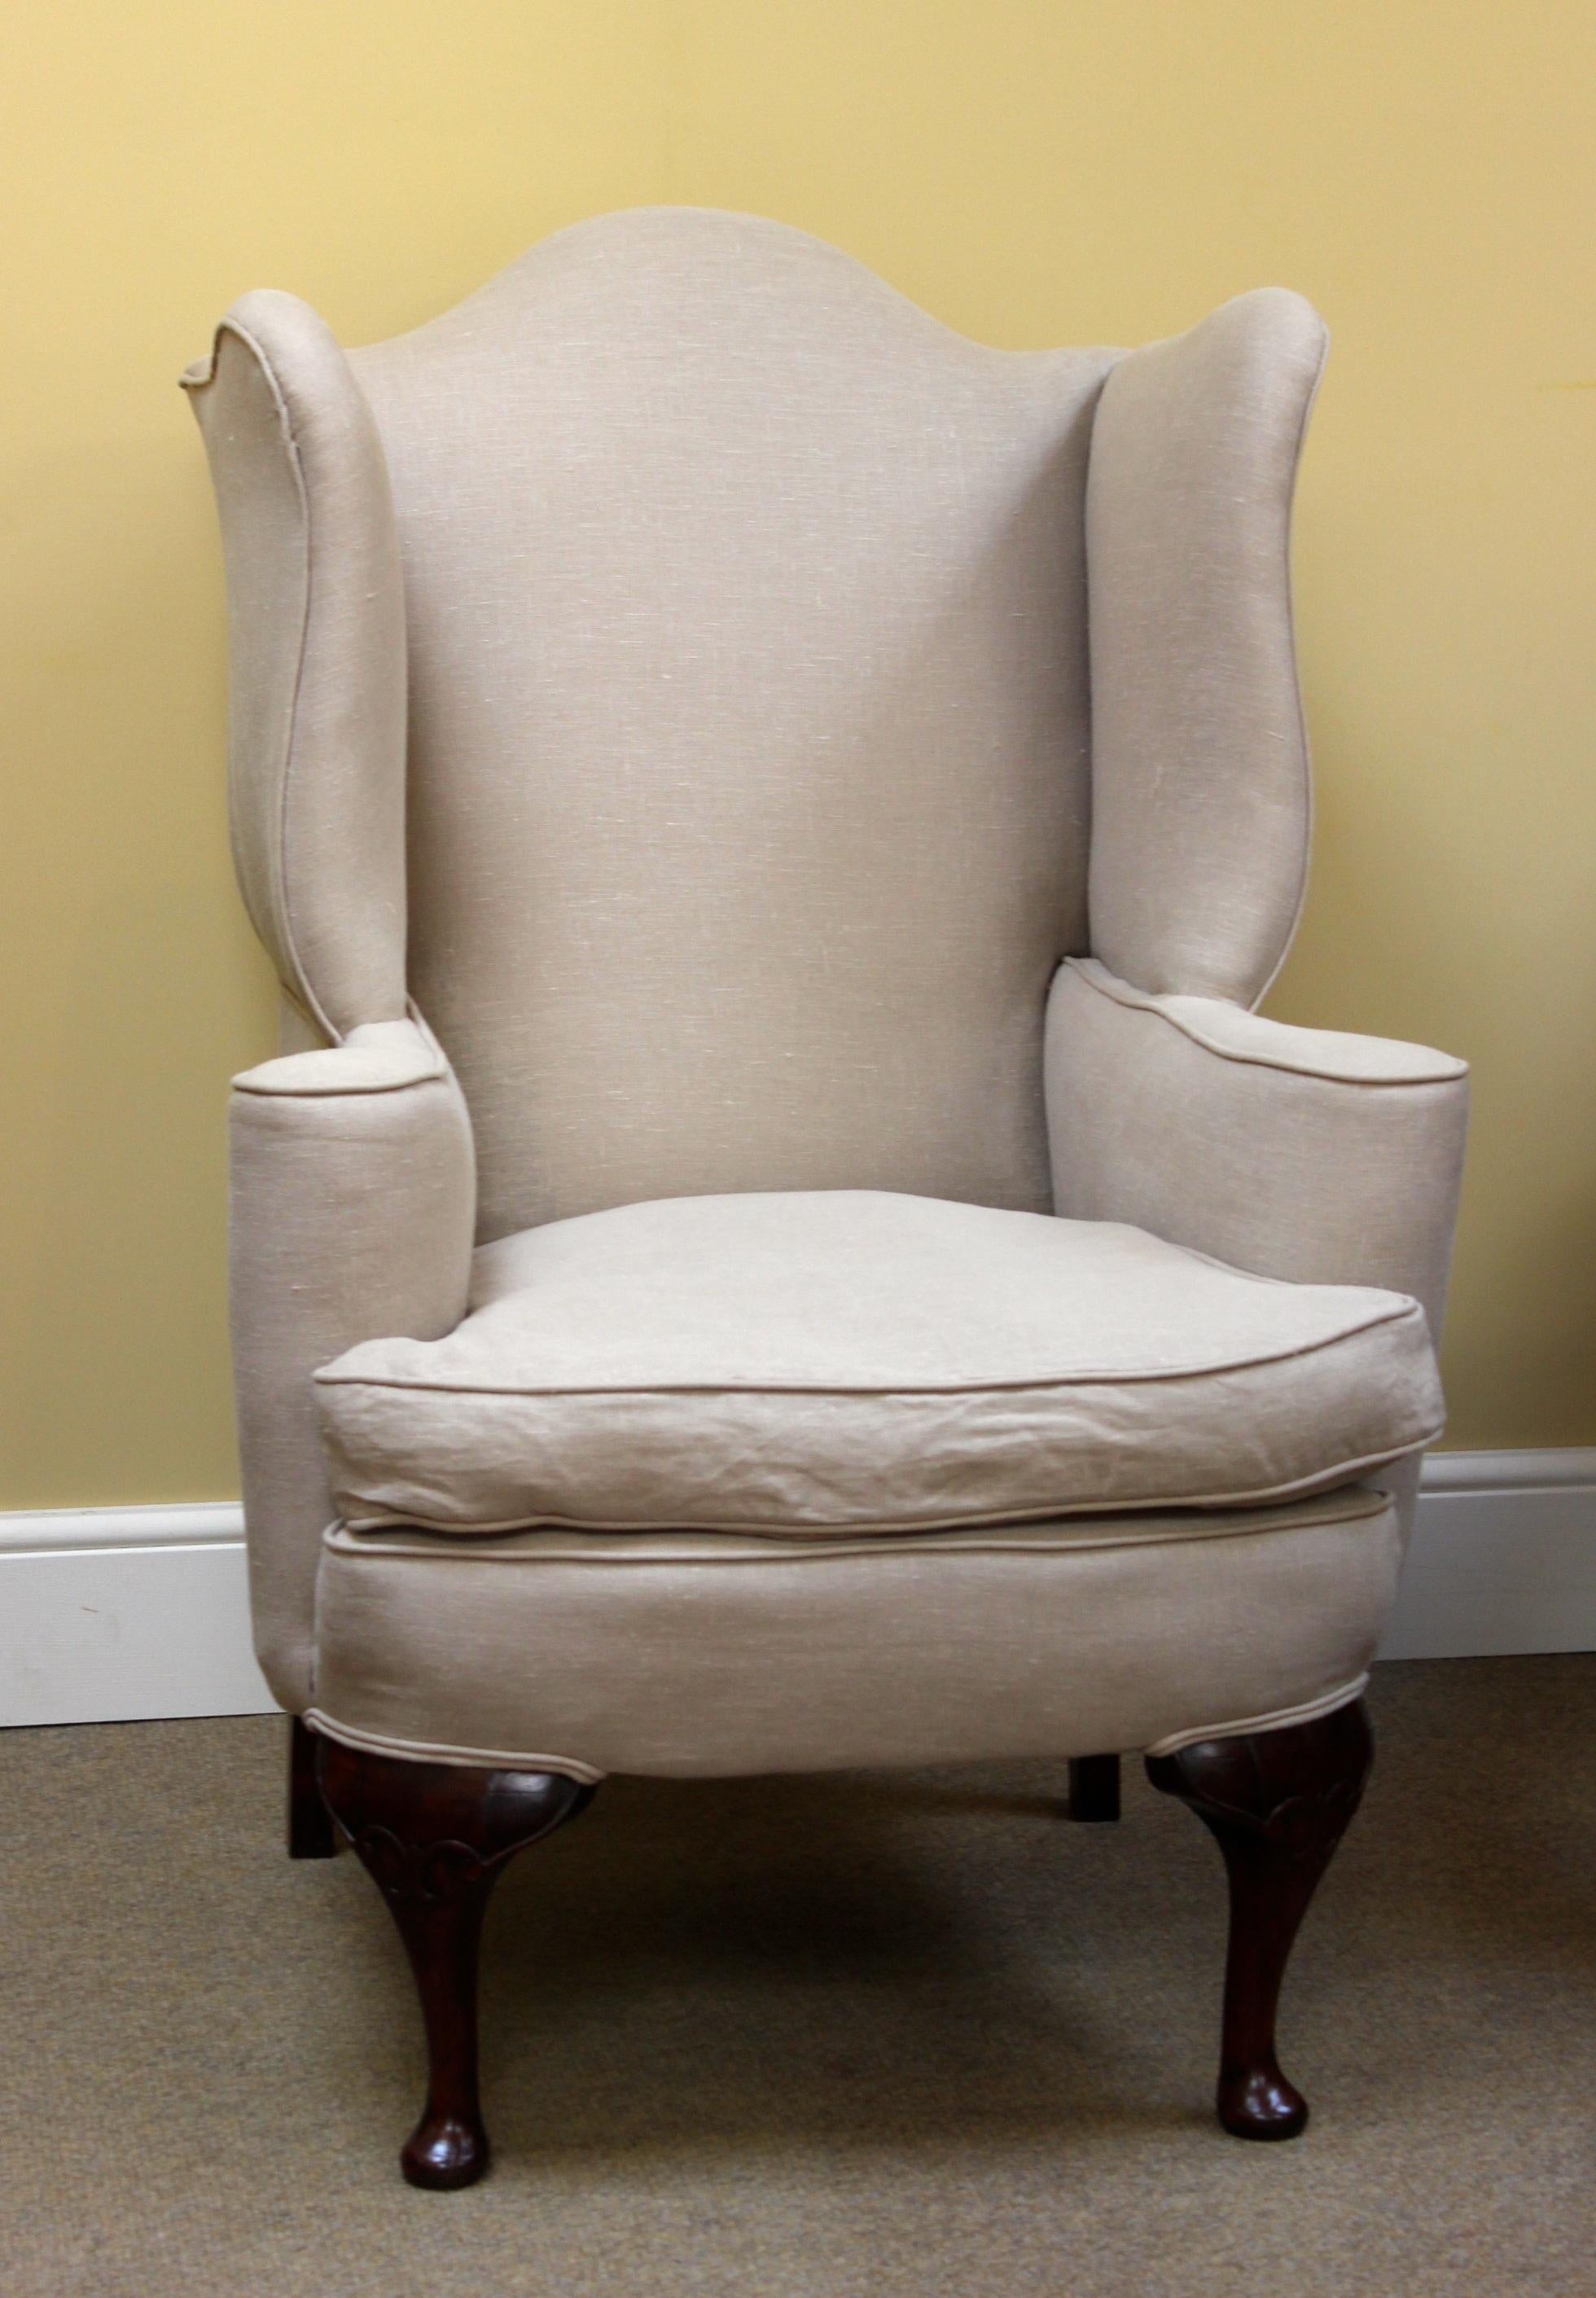 5921
19thc. Walnut Upholstered Wing Armchair
With cushion, cabriole legs & delicate 
Carving on pad feet.

31”w x 46”h x 31”d
79cm w x 117cm h x 79cm d

Items can be delivered by independent carrier
